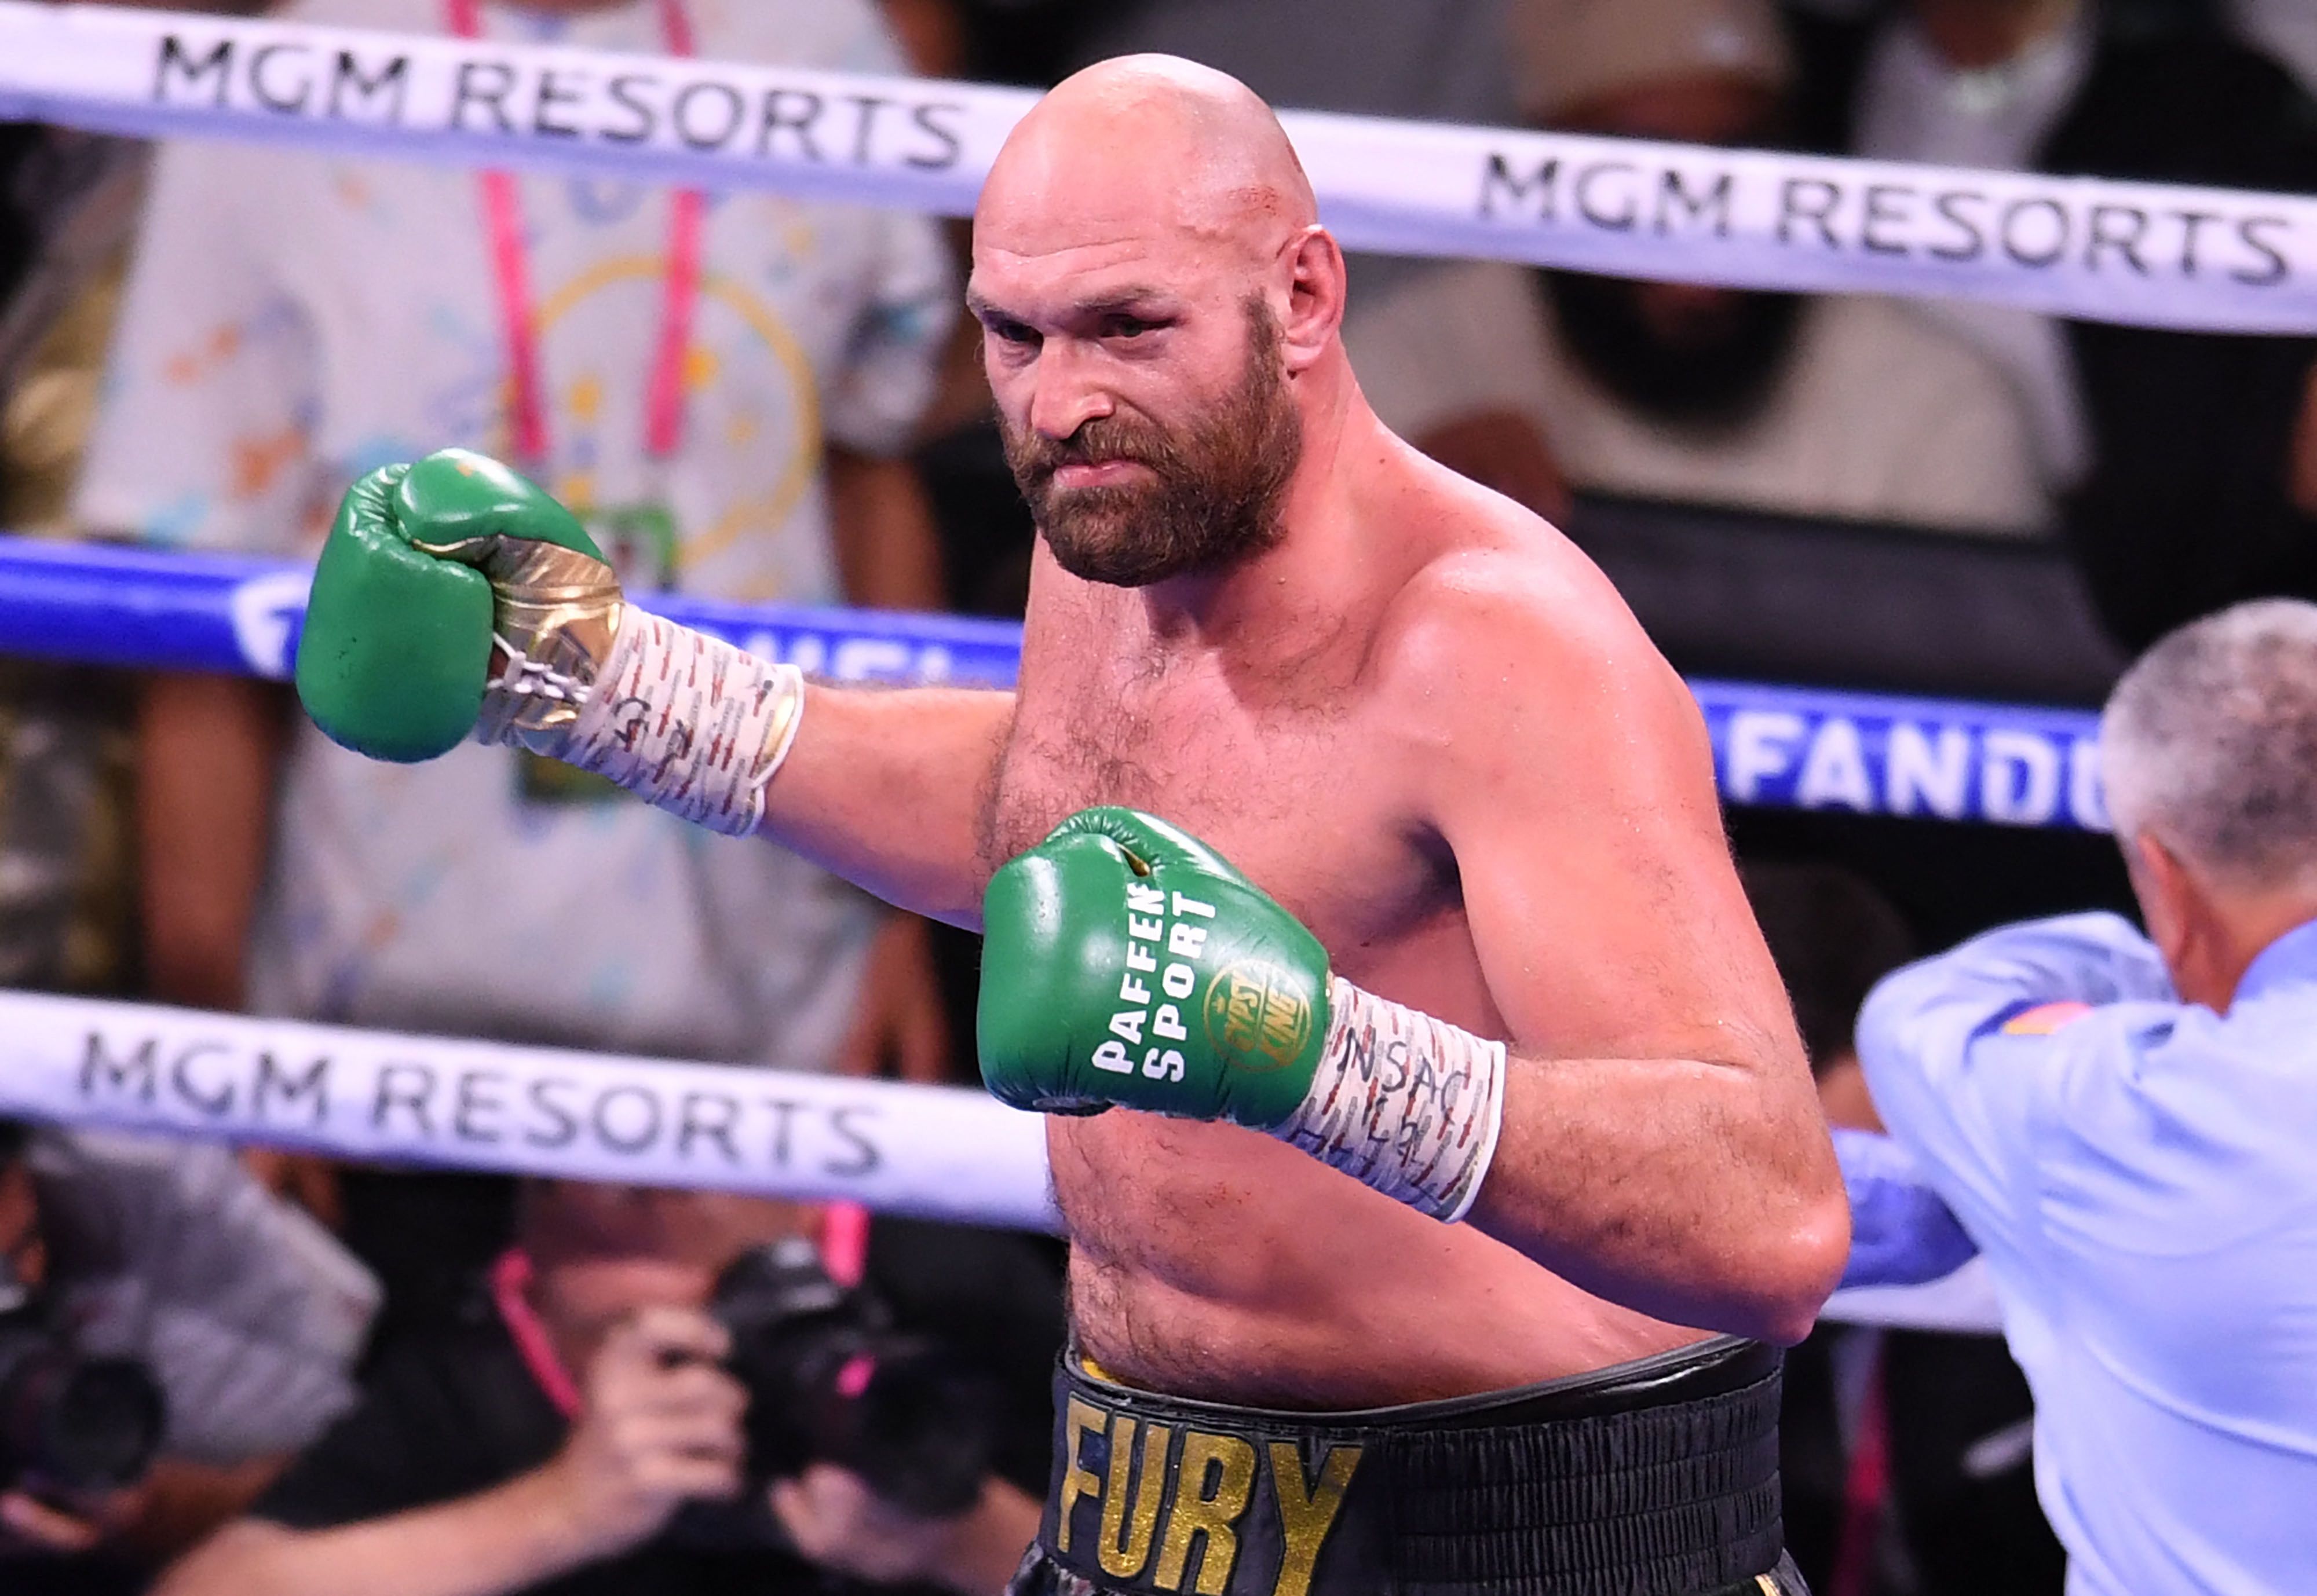 Tyson Fury remains the top heavyweight in boxing today